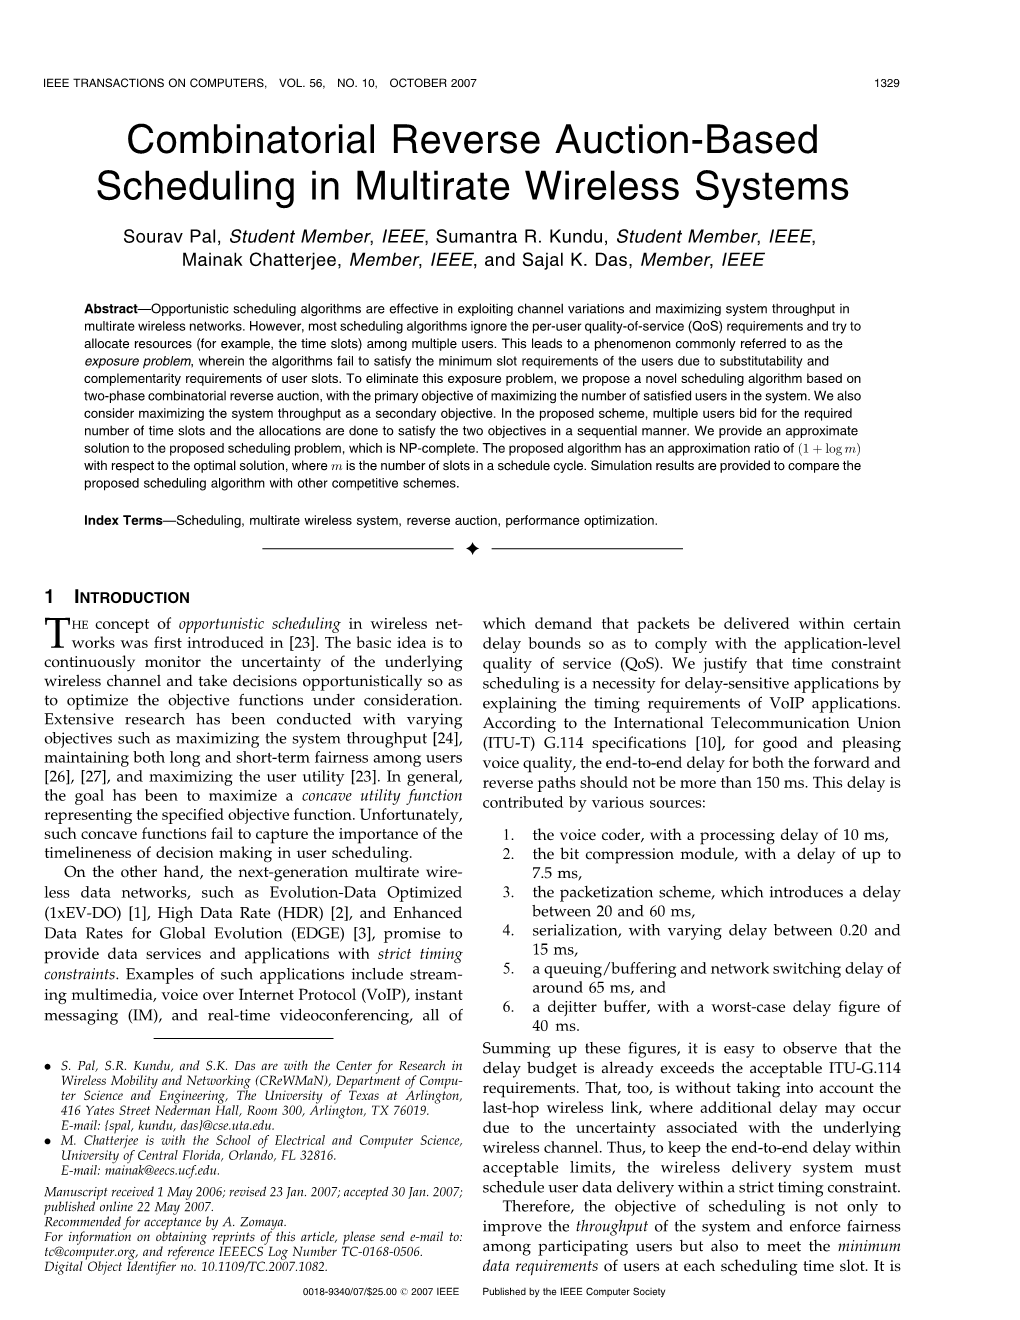 Combinatorial Reverse Auction Based Scheduling in Multi-Rate Wireless Systems